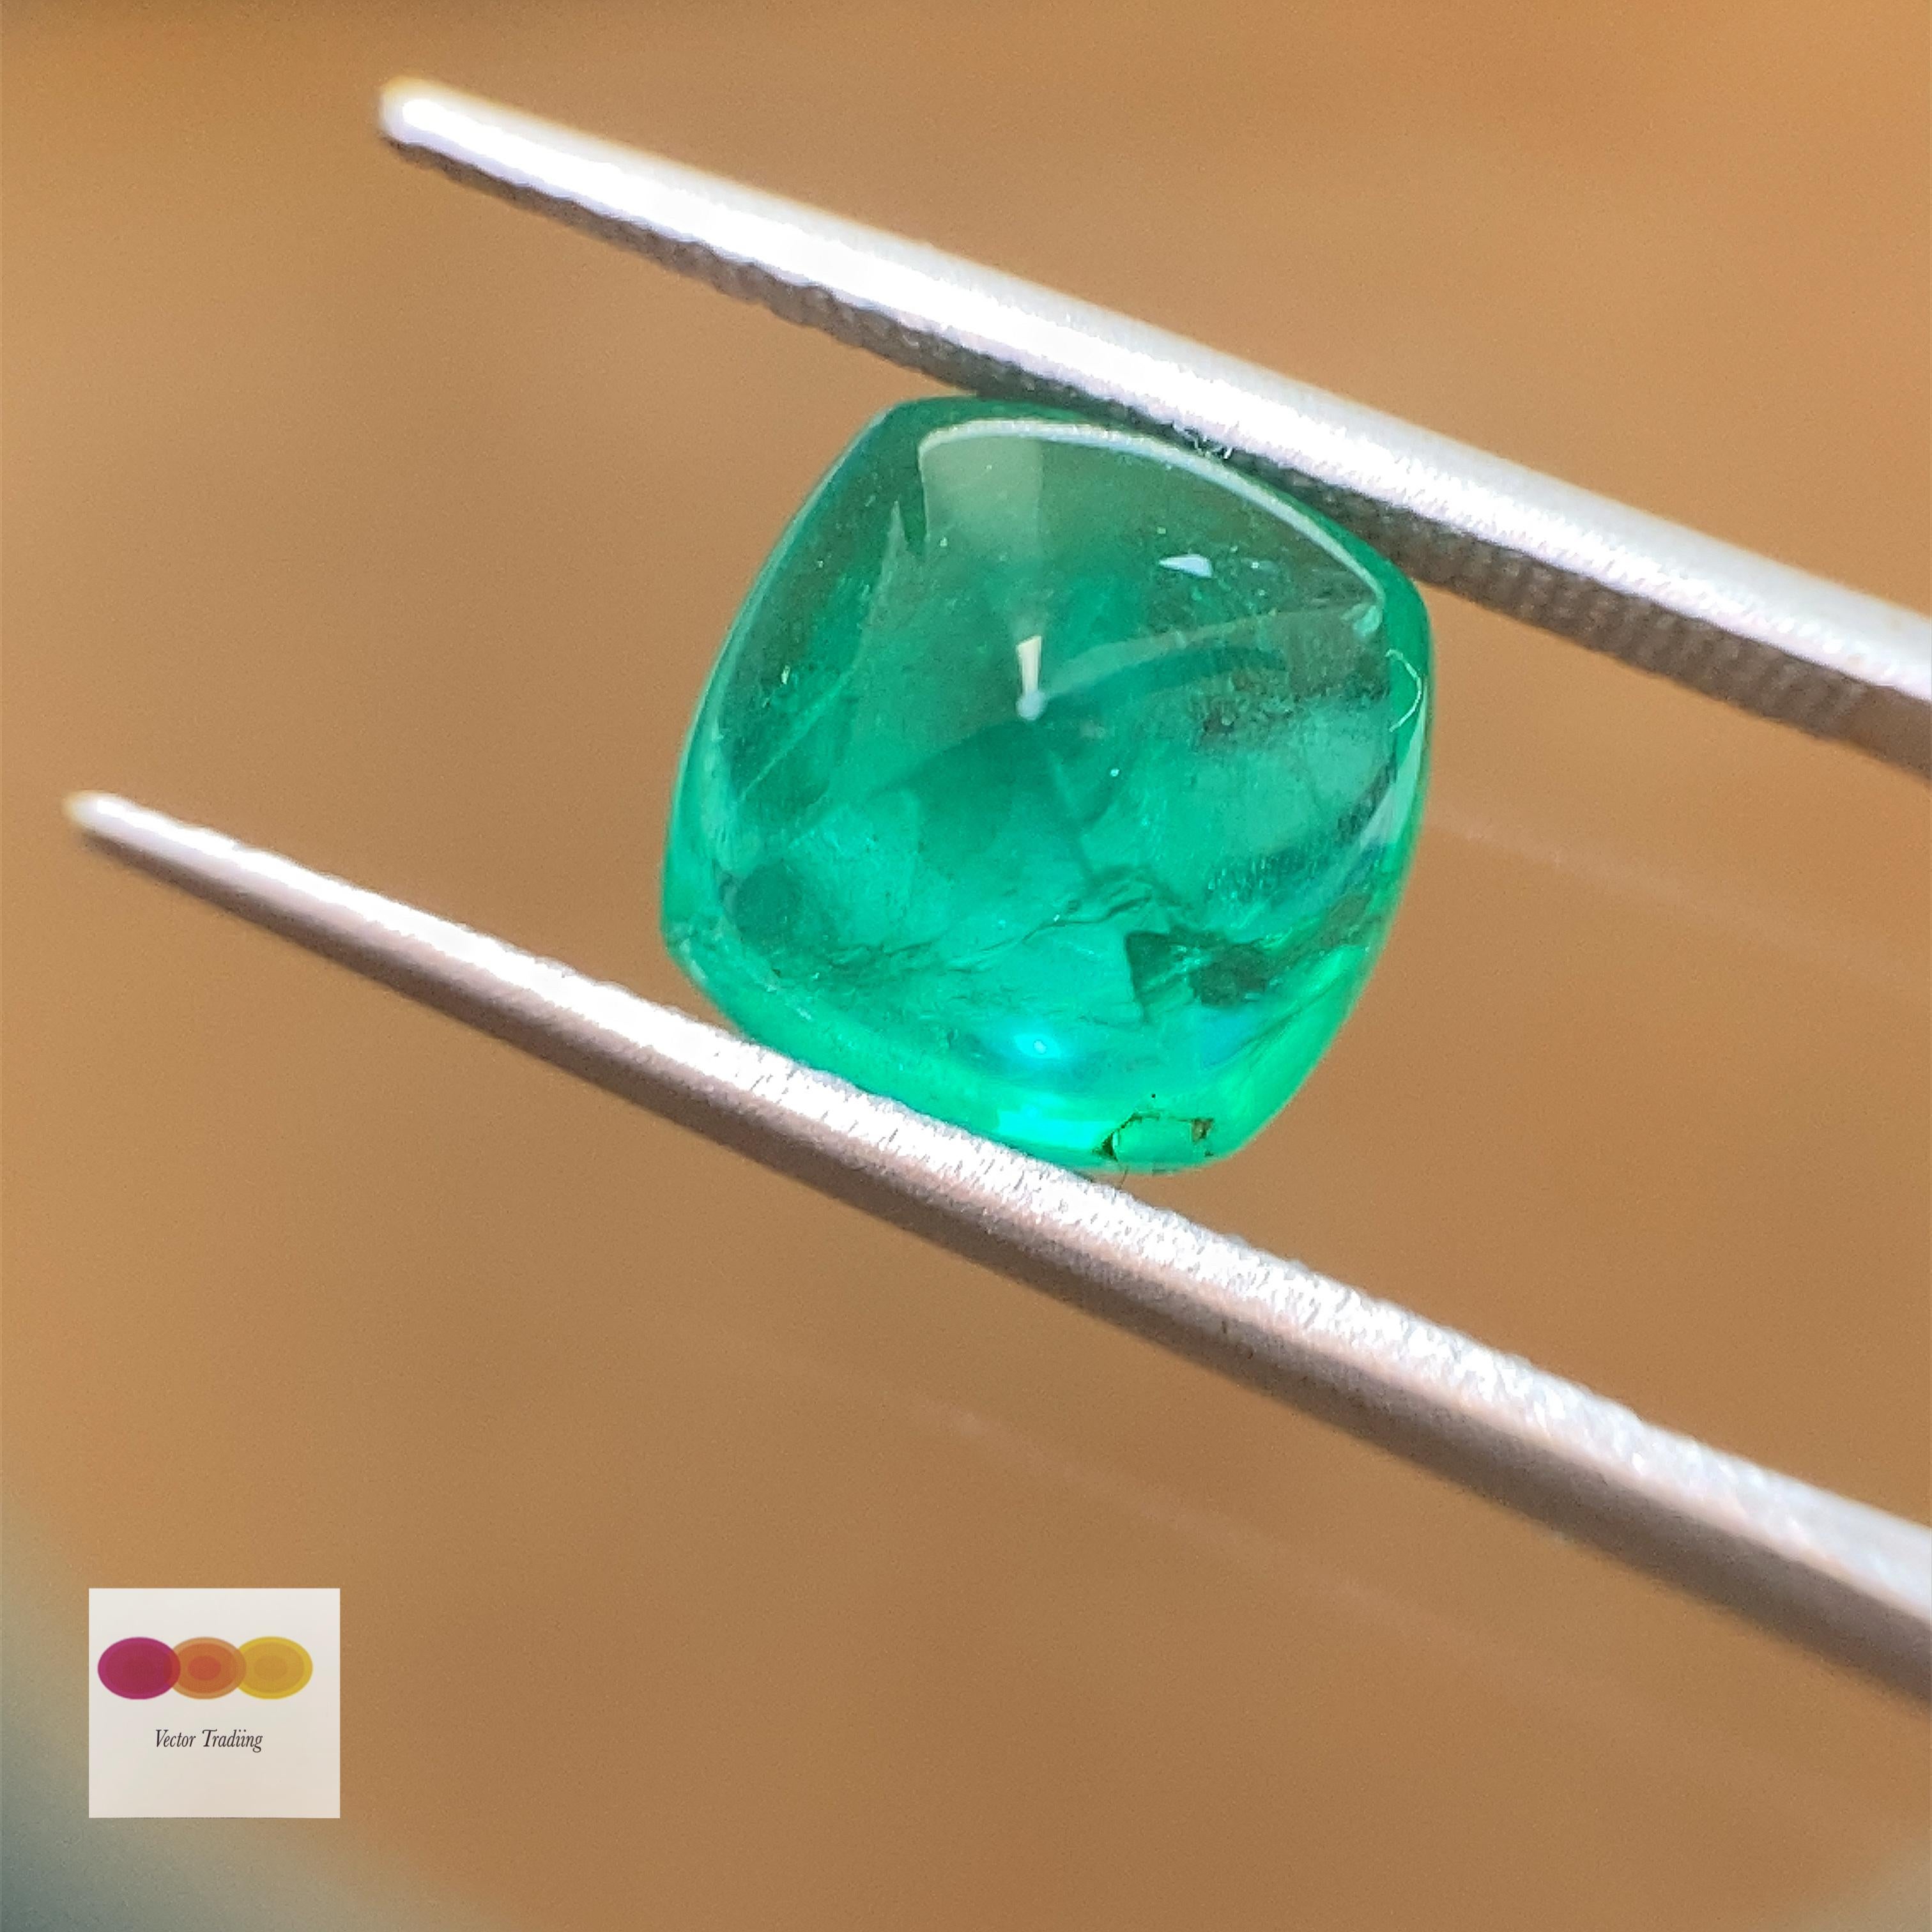 4.16 Carat Natural Zambian Vivid Green Emerald Sugarloaf:

A gorgeous gem, it is a 4.16 carat natural Zambian vivid green emerald sugarloaf. Hailing from the majestic Zambian mines in Africa, the emerald possesses a vivid green colour saturation,